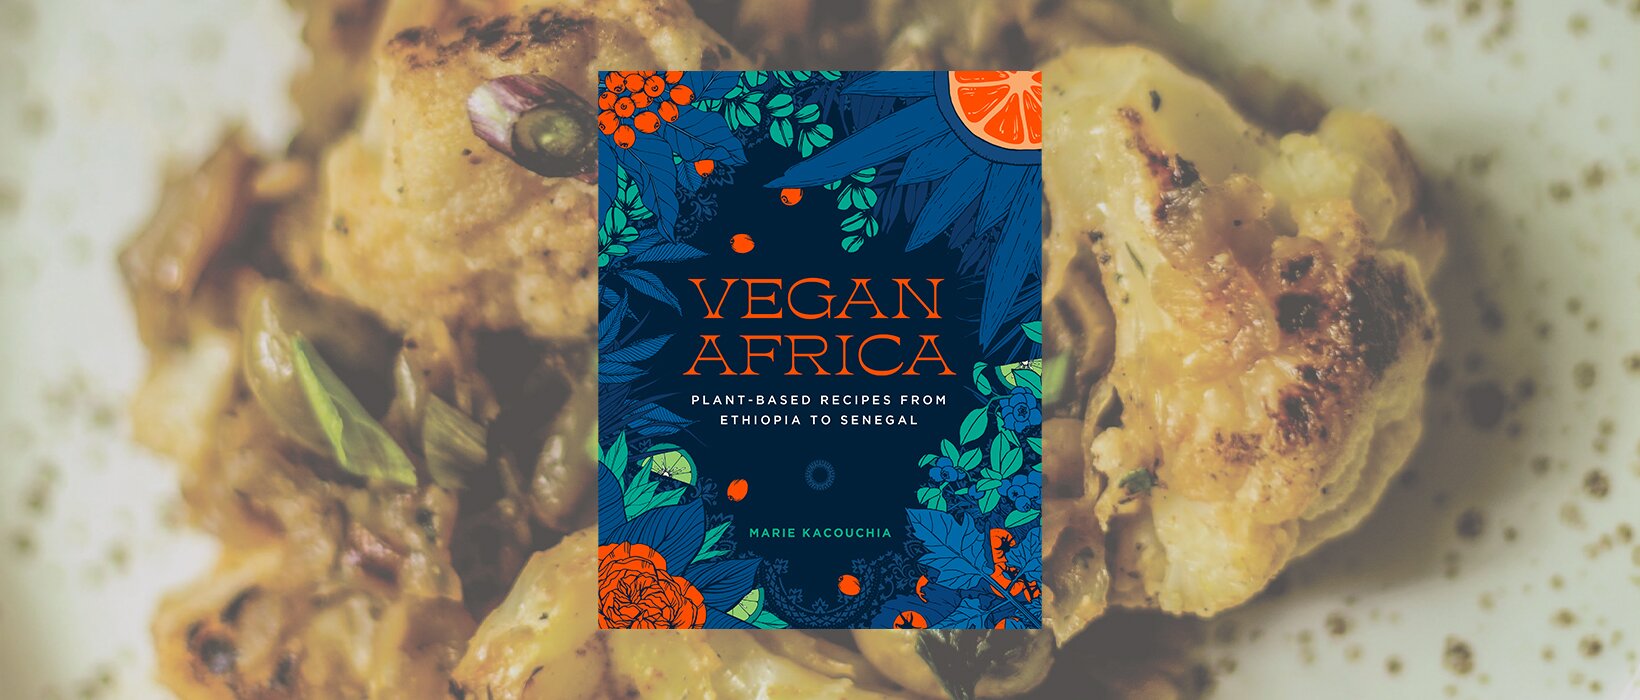 Book review: Vegan Africa by Marie Kacouchia